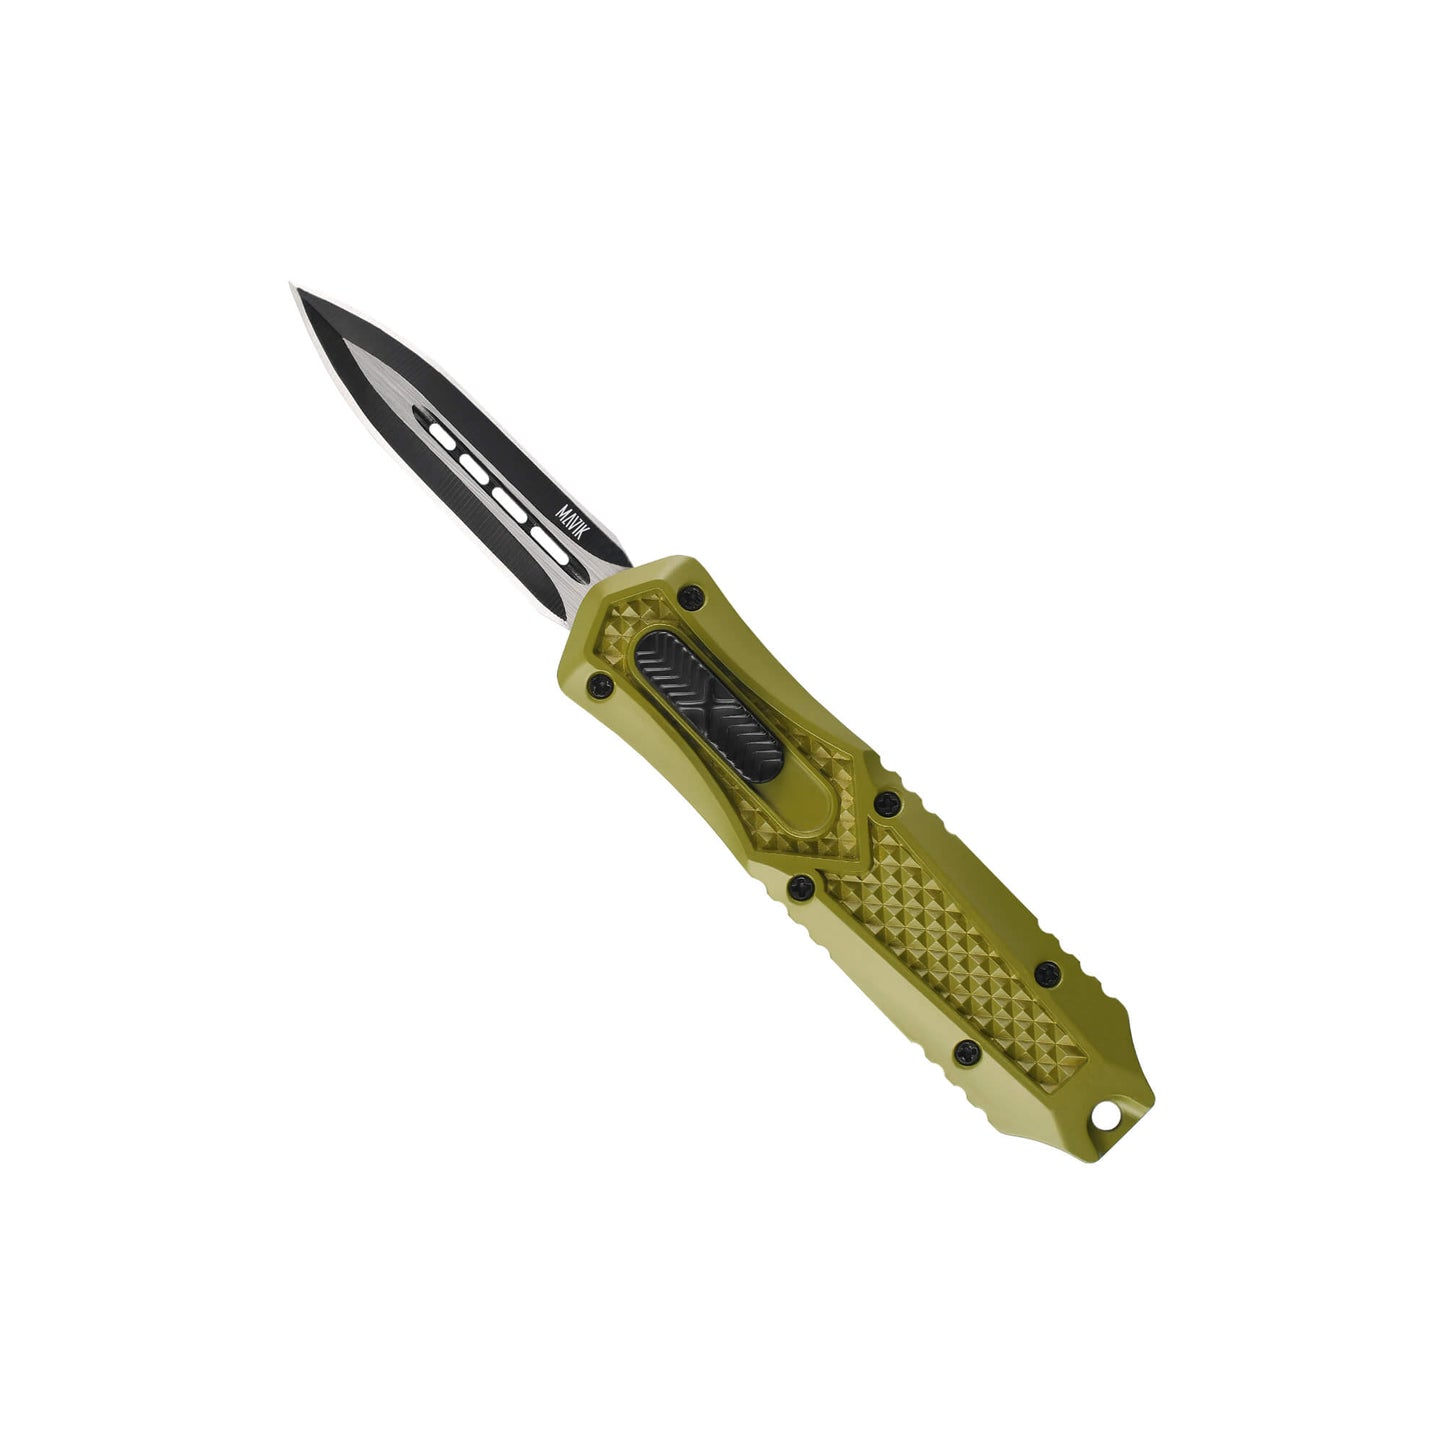 Green Automatic OTF knife Relik from Mavik Gear with spear point blade, Zinc alloy handle, button lock and lanyard hole.